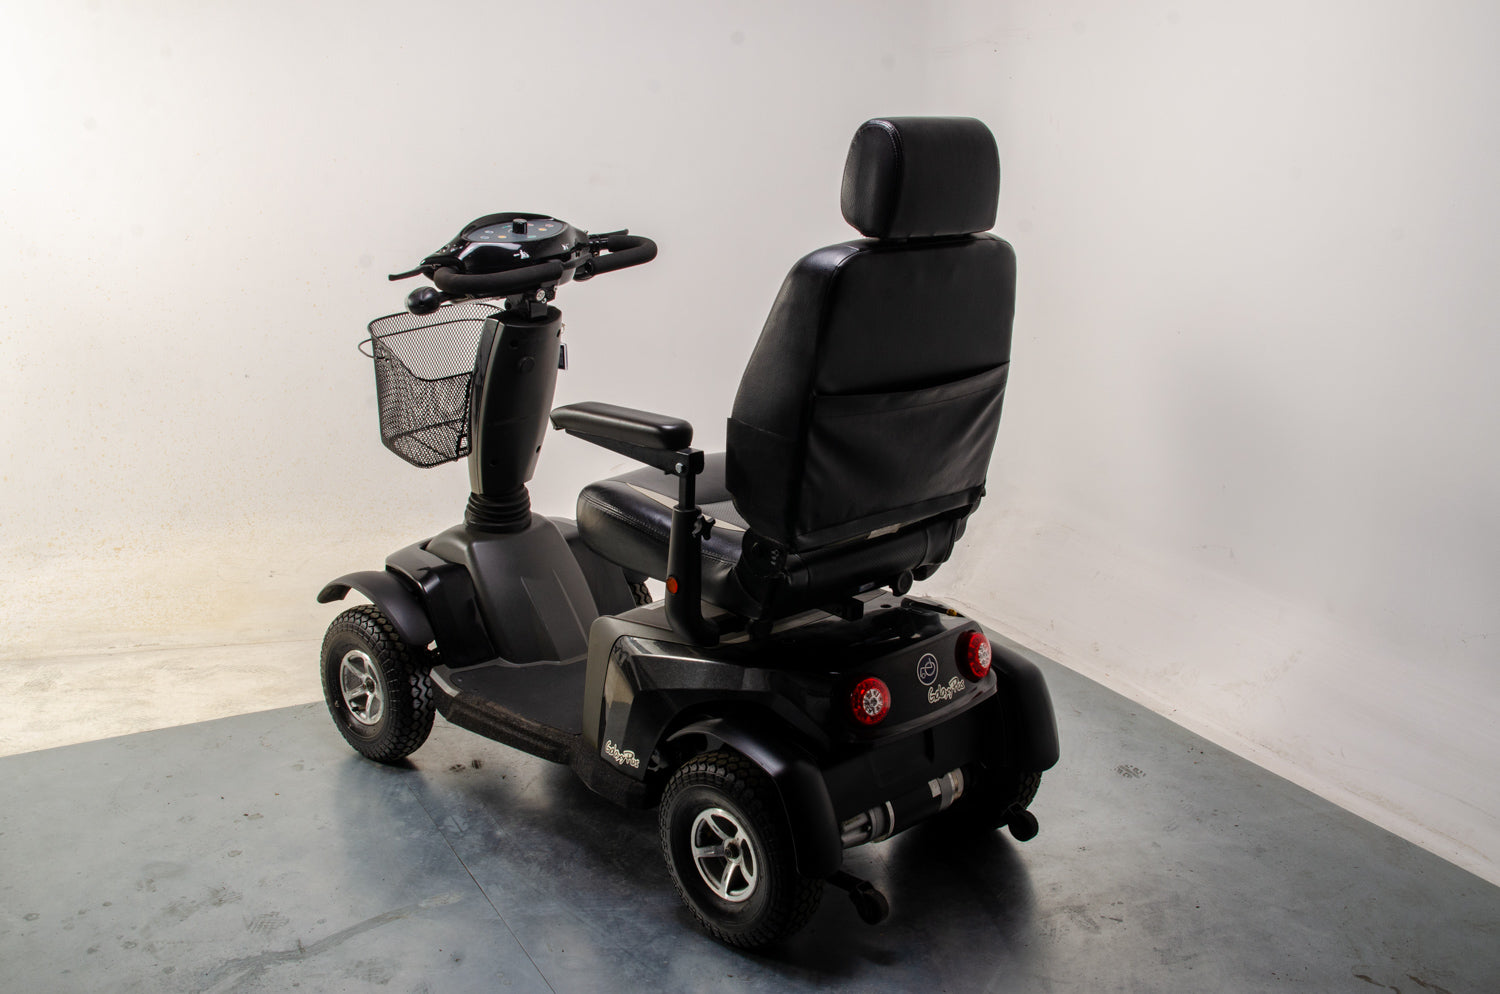 Van Os Galaxy 2 All-Terrain Off-Road Used Mobility Scooter 8mph Large Comfy Class 3 Road Legal 13188